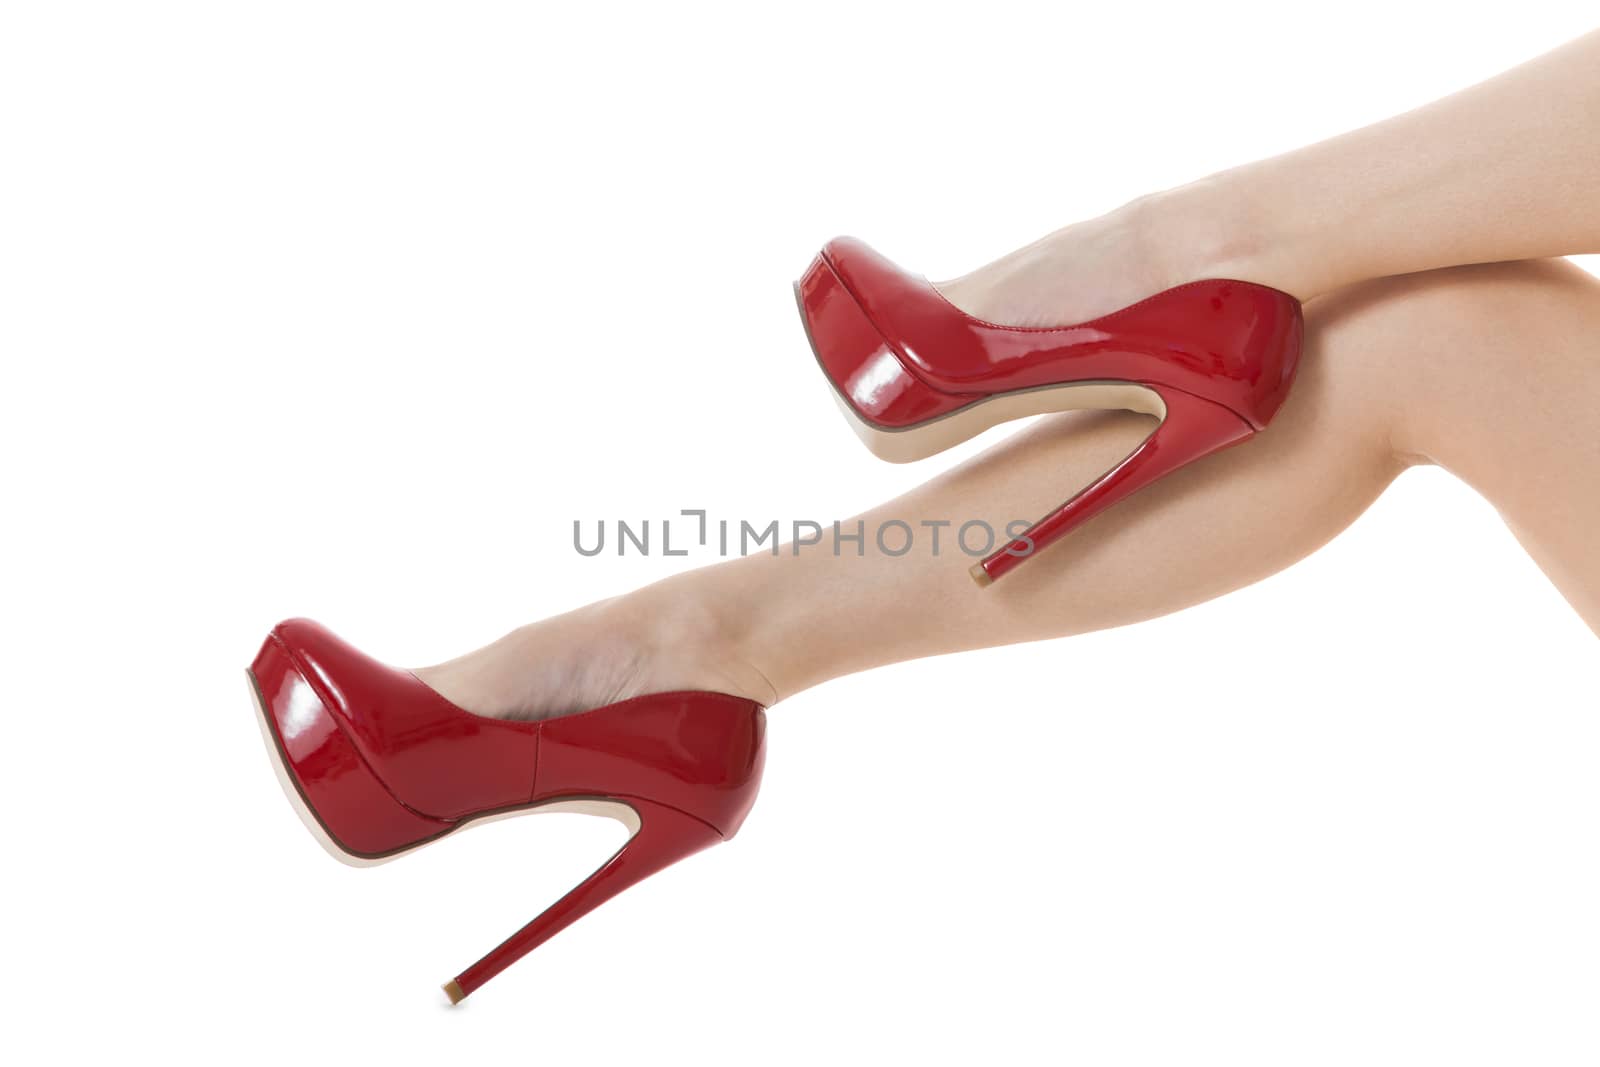 Flawless Woman Legs in Elegant Red High Heel Shoes, Isolated on White Background.